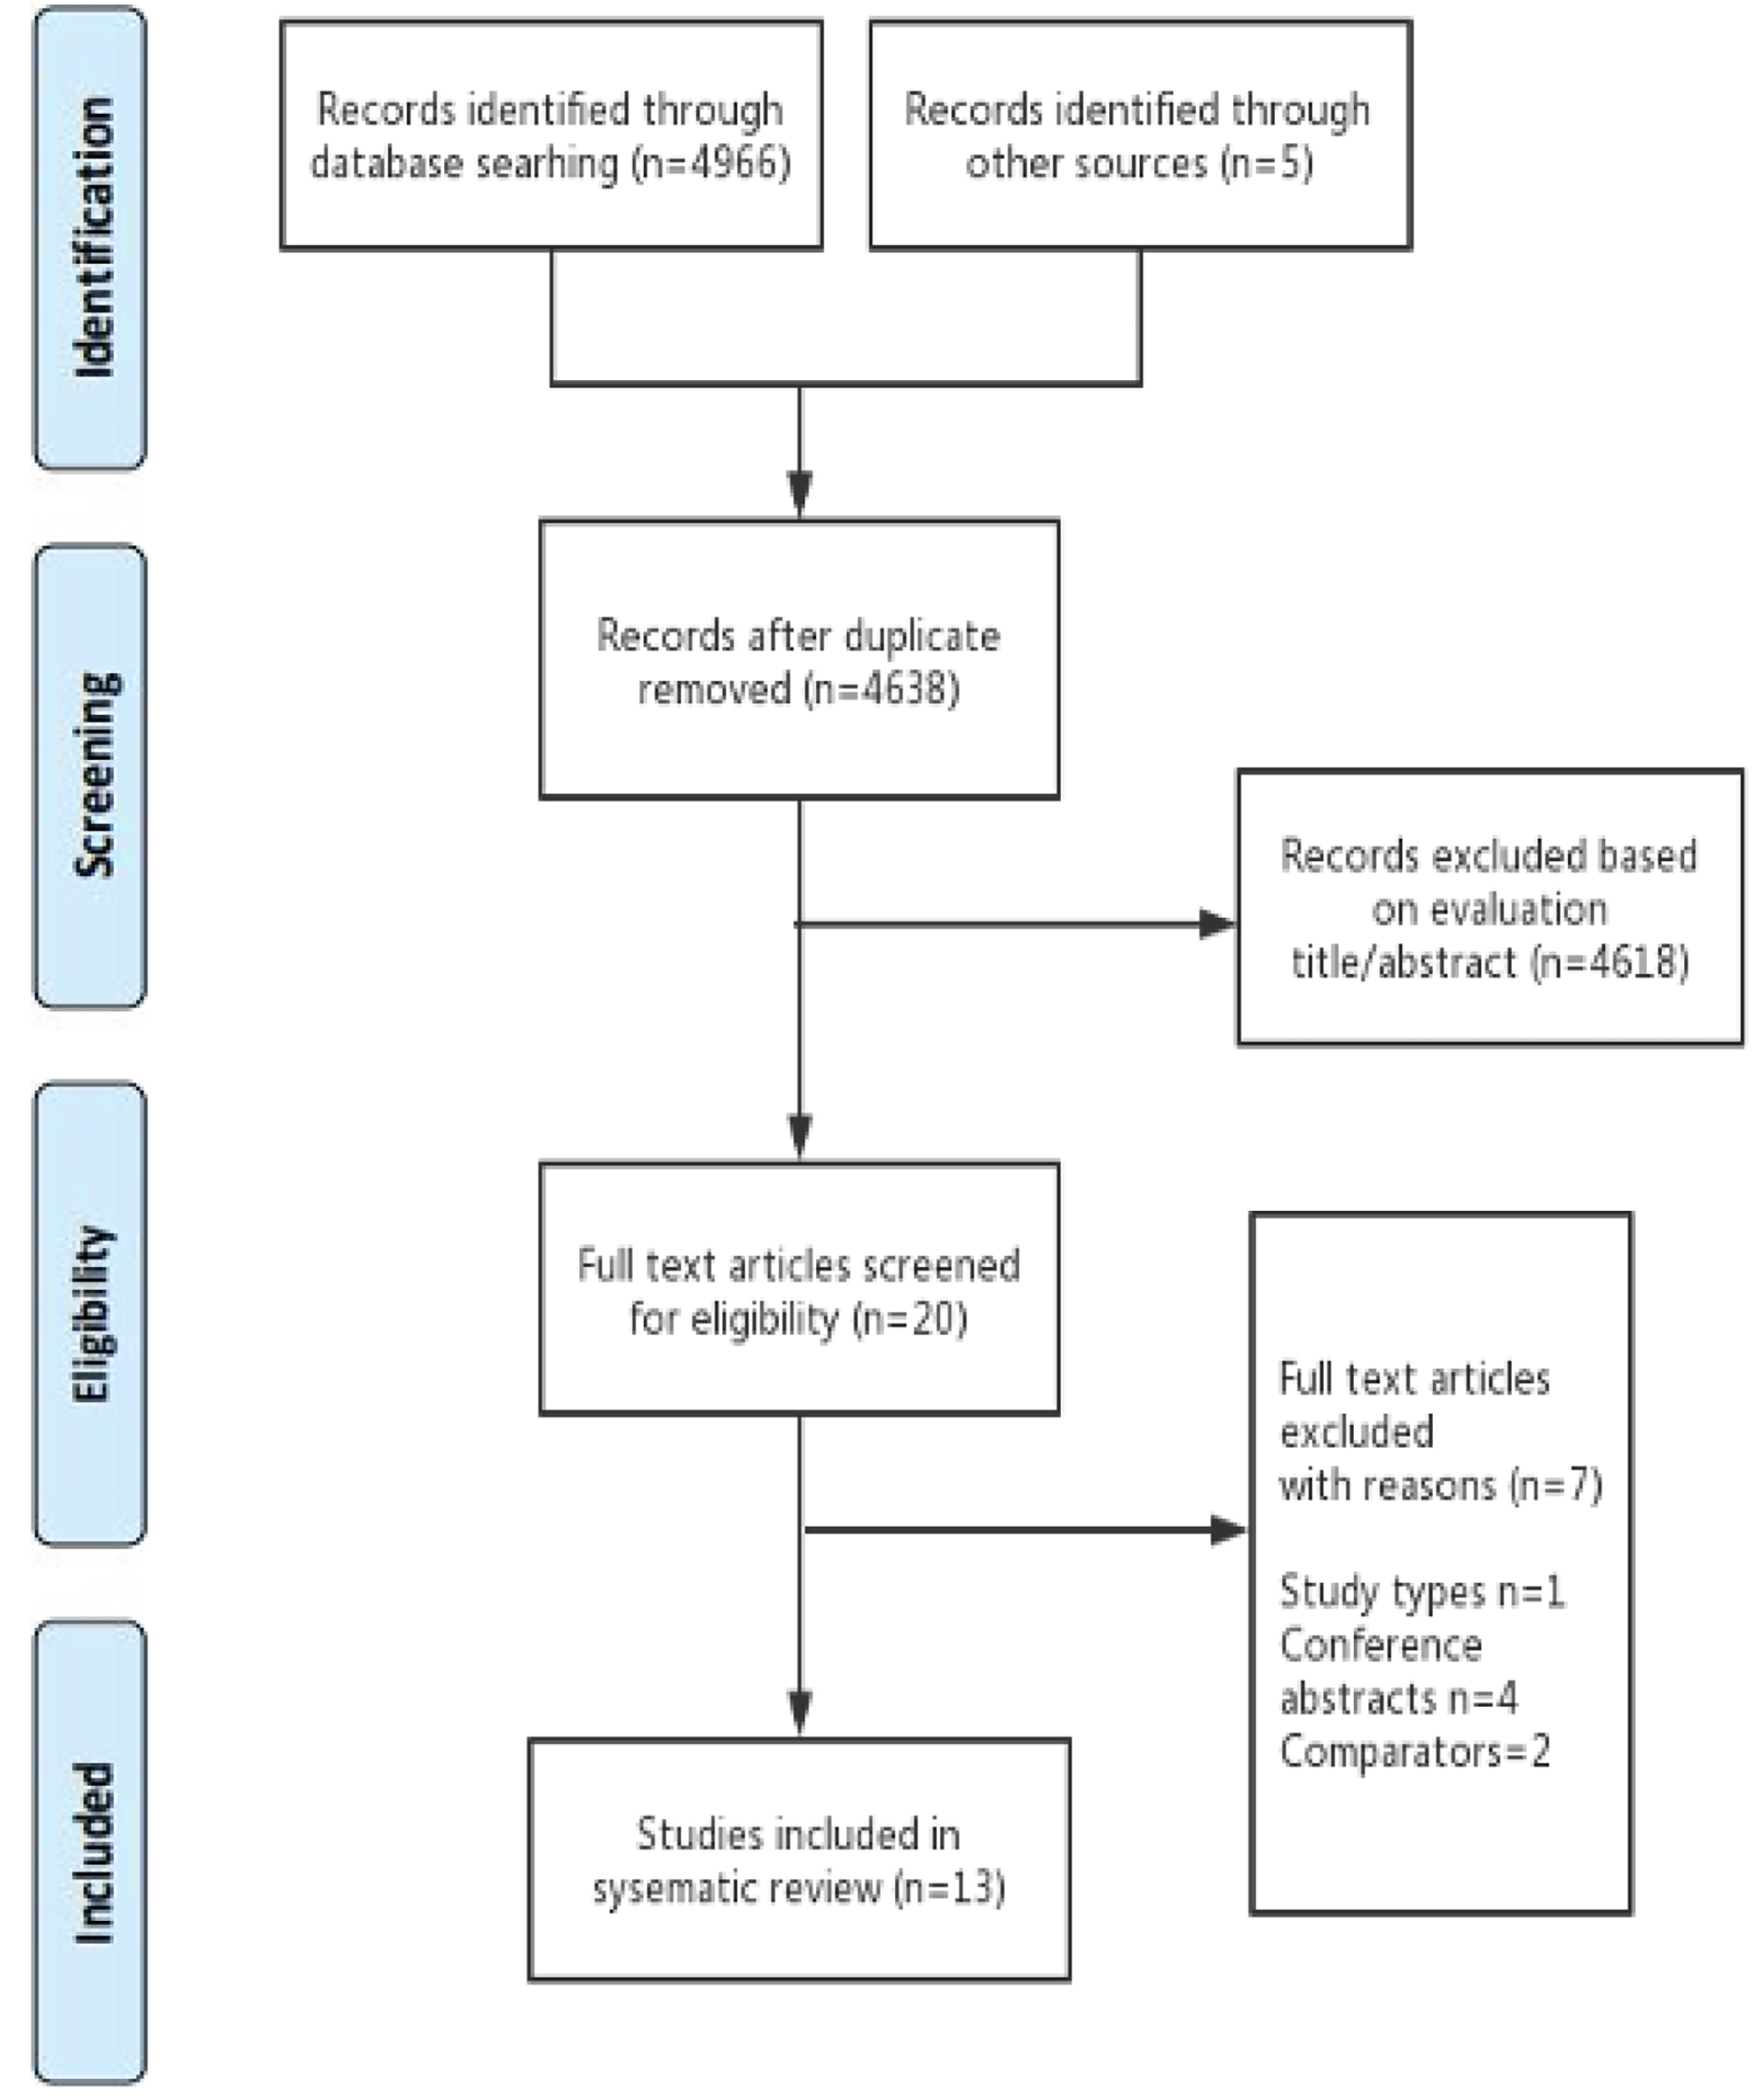 Rate and reasons for peritoneal dialysis dropout following haemodialysis to peritoneal dialysis switch: a systematic review and meta-analysis